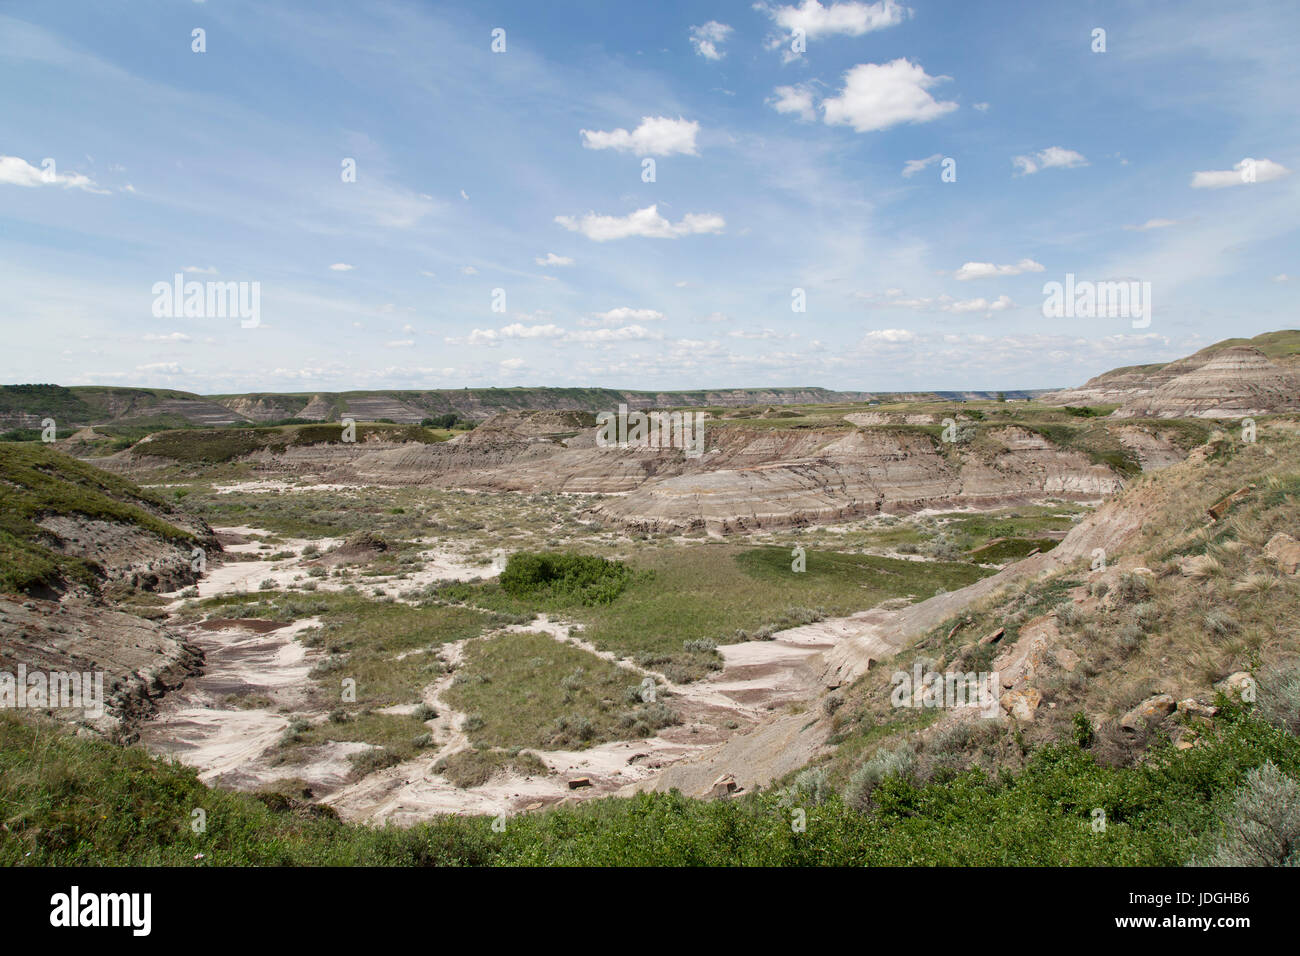 Midland Provincial Park, near Drumheller, in Alberta, Canada. The park has a self-guided trail for exploring the landscape of the Badlands. Stock Photo